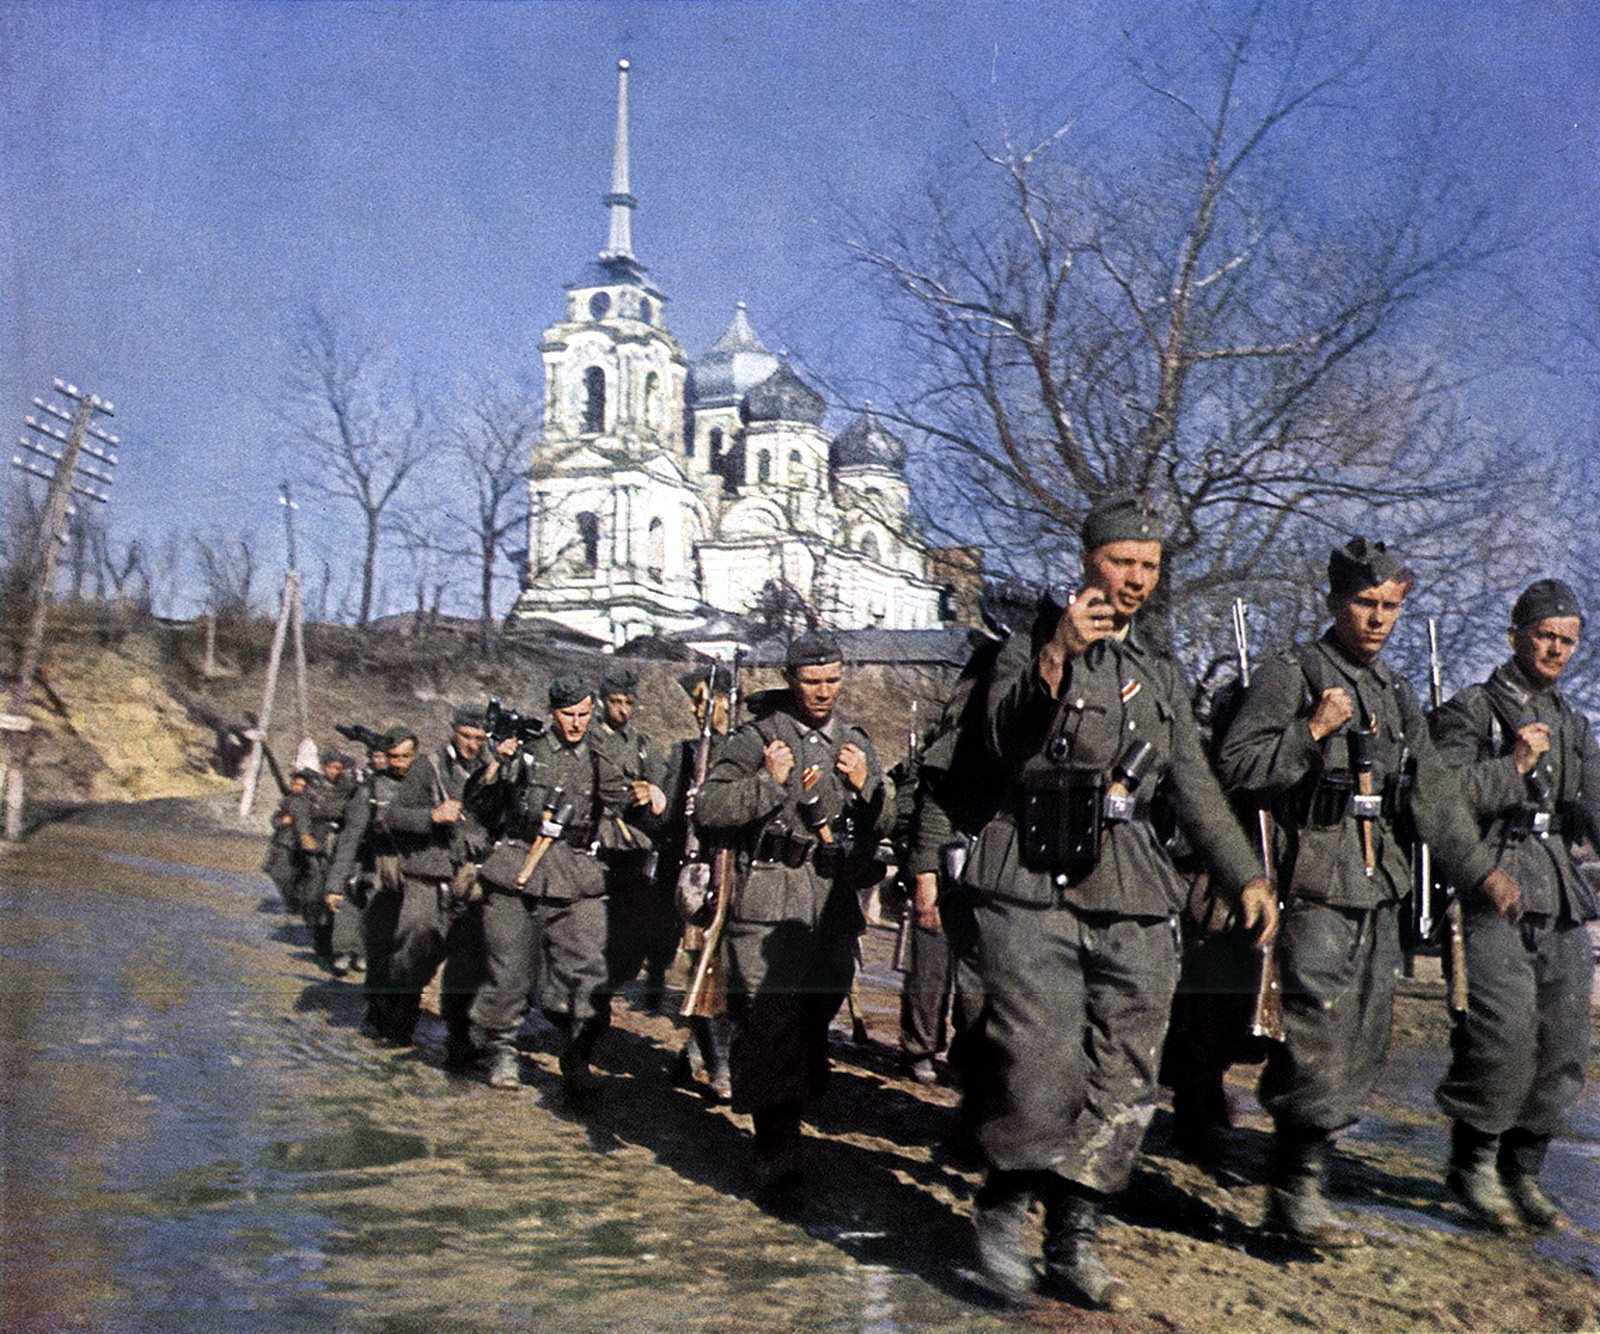 world-war-ii-in-color-german-soldiers-marching-in-the-east-in-1941